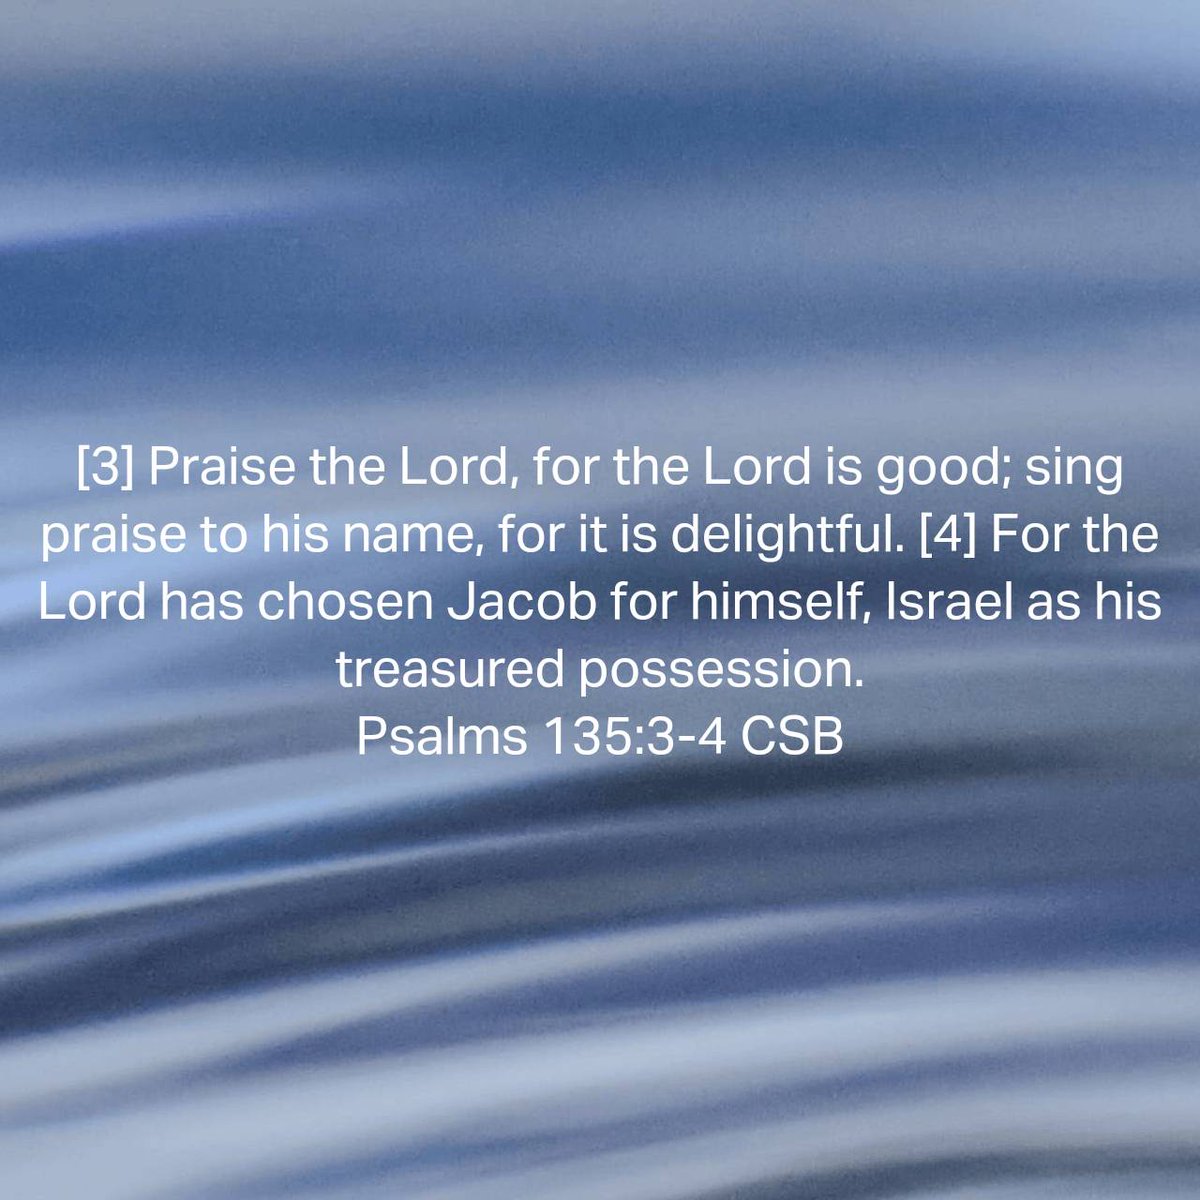 Psalms 135:3-4 CSB [3] Praise the Lord, for the Lord is good; sing praise to his name, for it is delightful. [4] For the Lord has chosen Jacob for himself, Israel as his treasured possession. bible.com/bible/1713/psa…